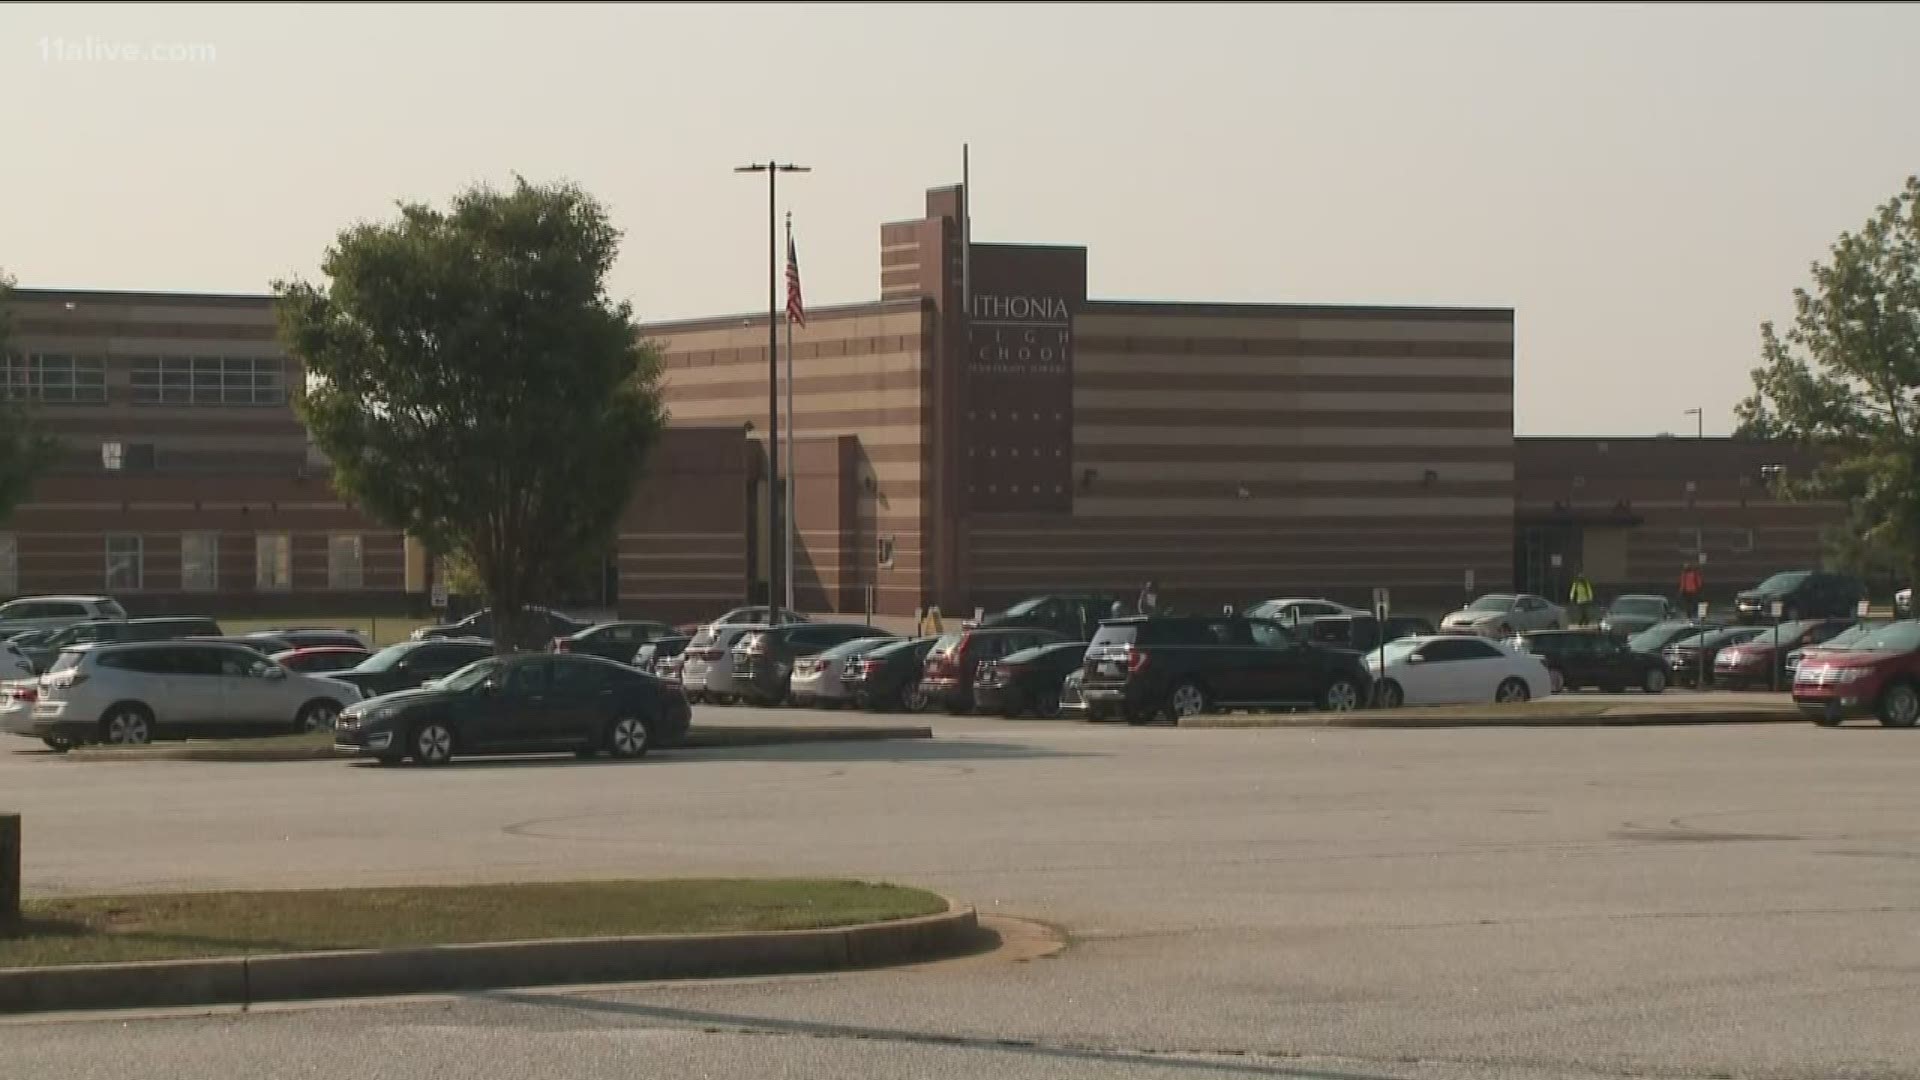 Lithonia High School was temporarily placed on lockdown after a student brought a weapon to school and was arrested on Tuesday.